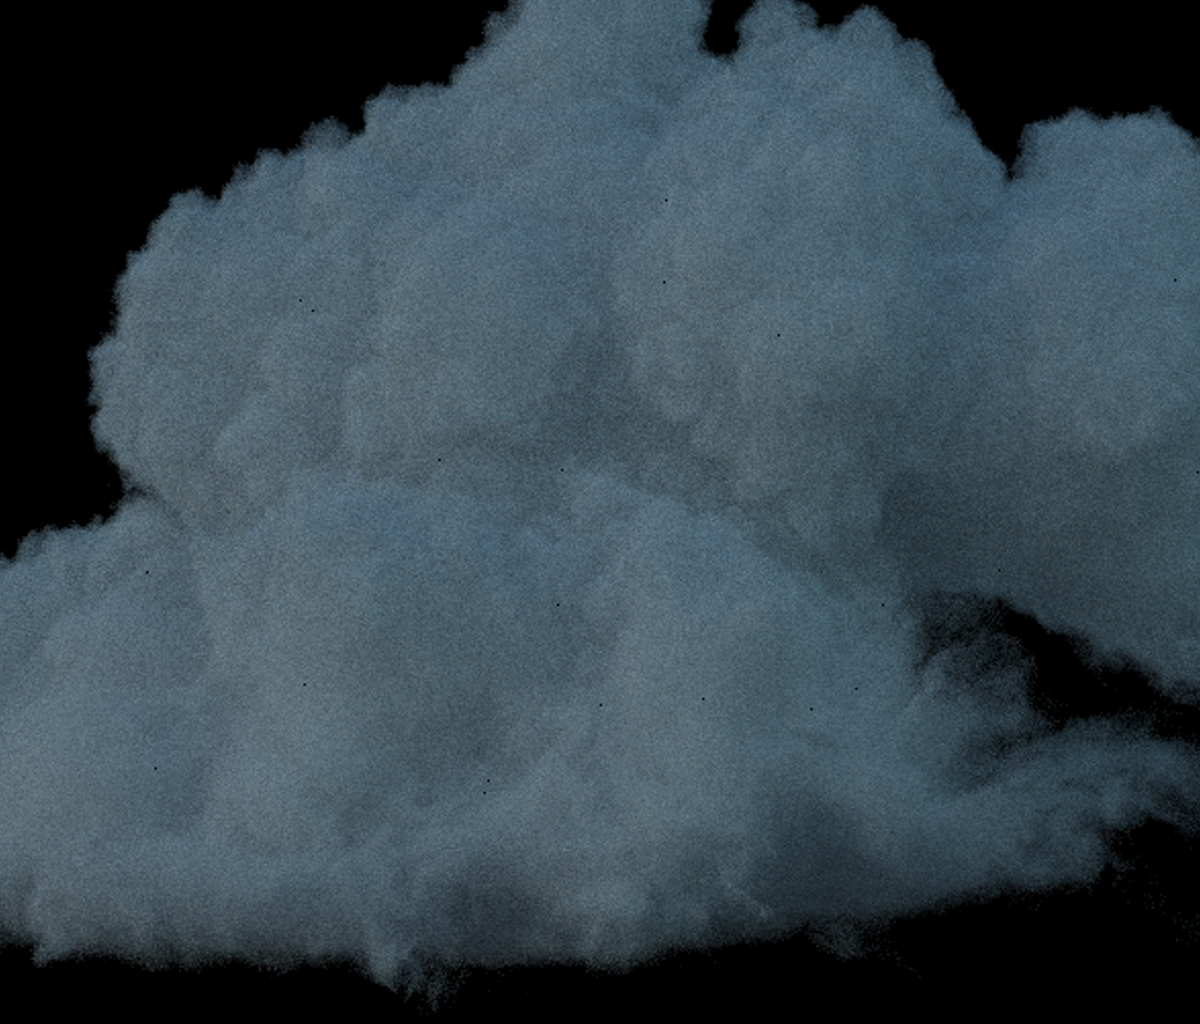 Black spots when rendered with procedural sky (possible NaN values)